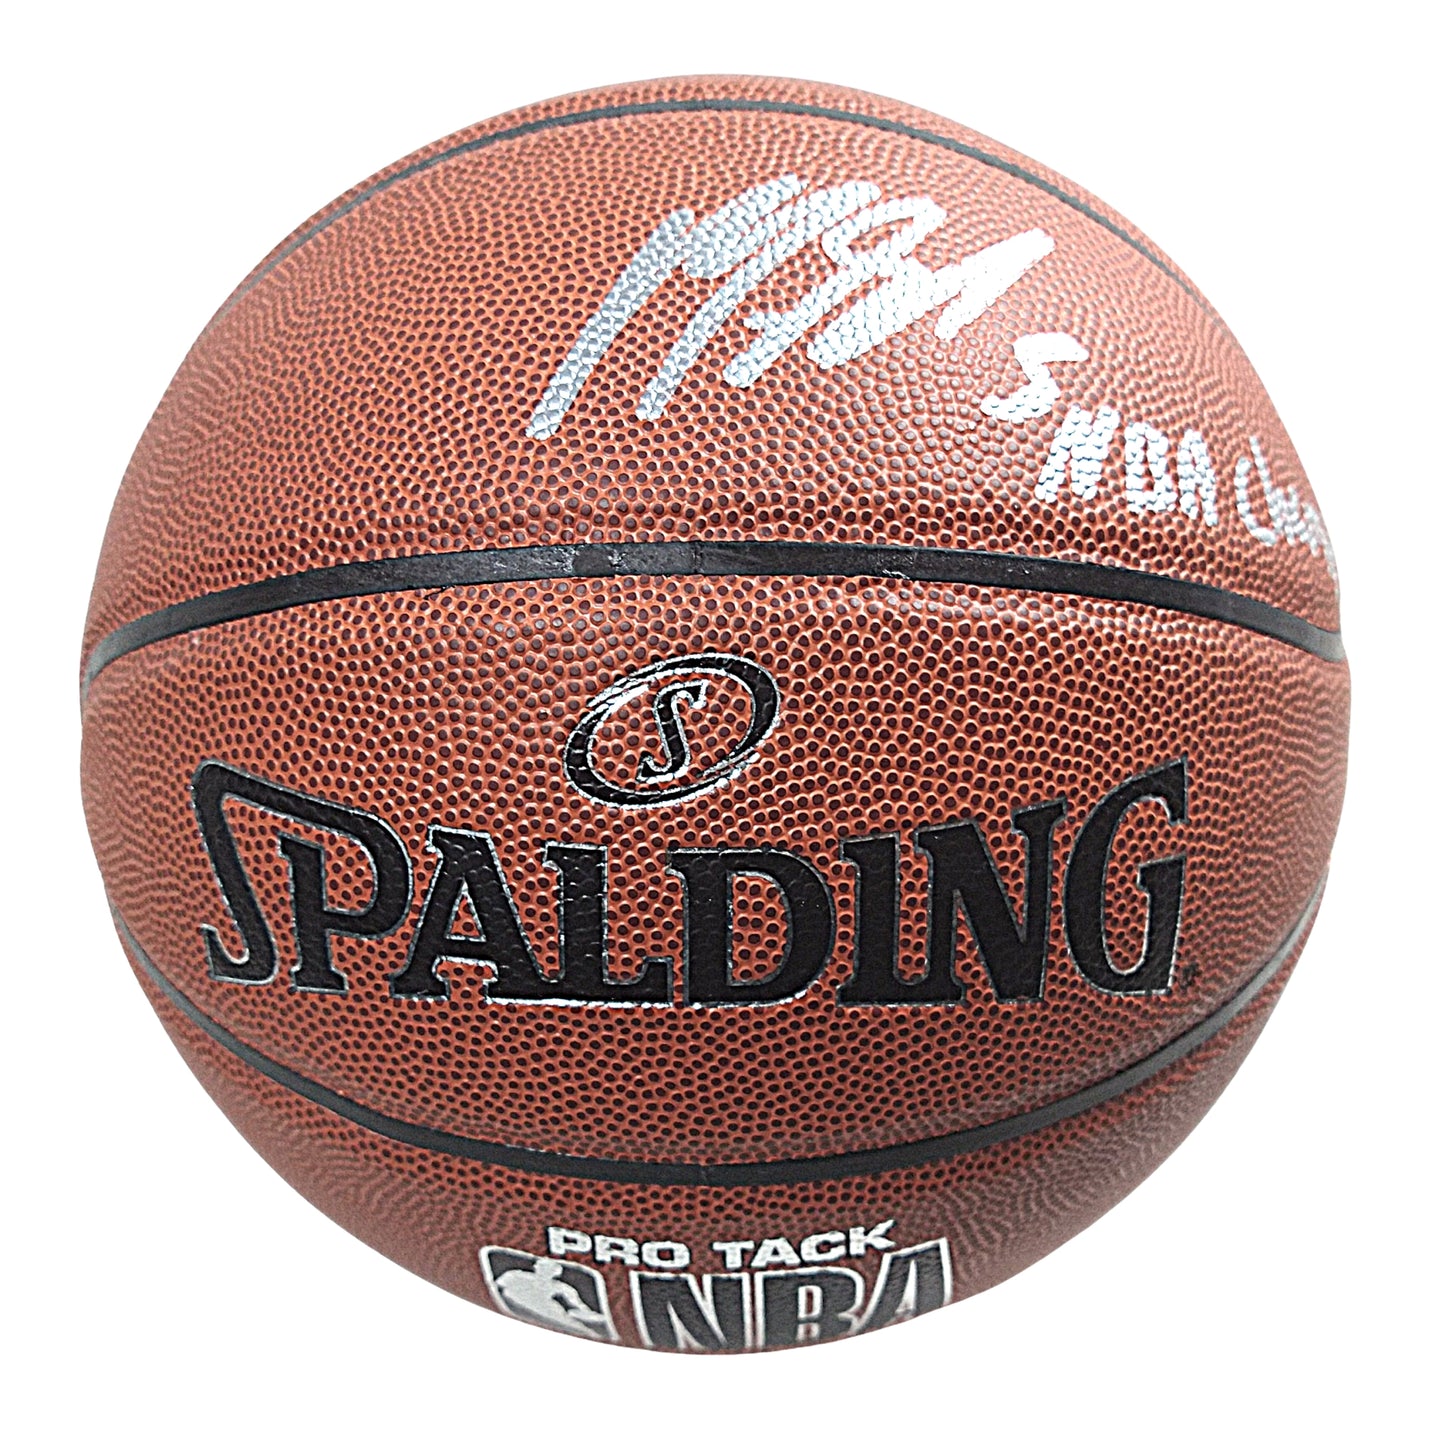 Basketballs- Autographed- Marreese Mo Speights Signed NBA Basketball with NBA Champs Inscription - Golden State Warriors - Exact Proof - Beckett BAS Authentication 104